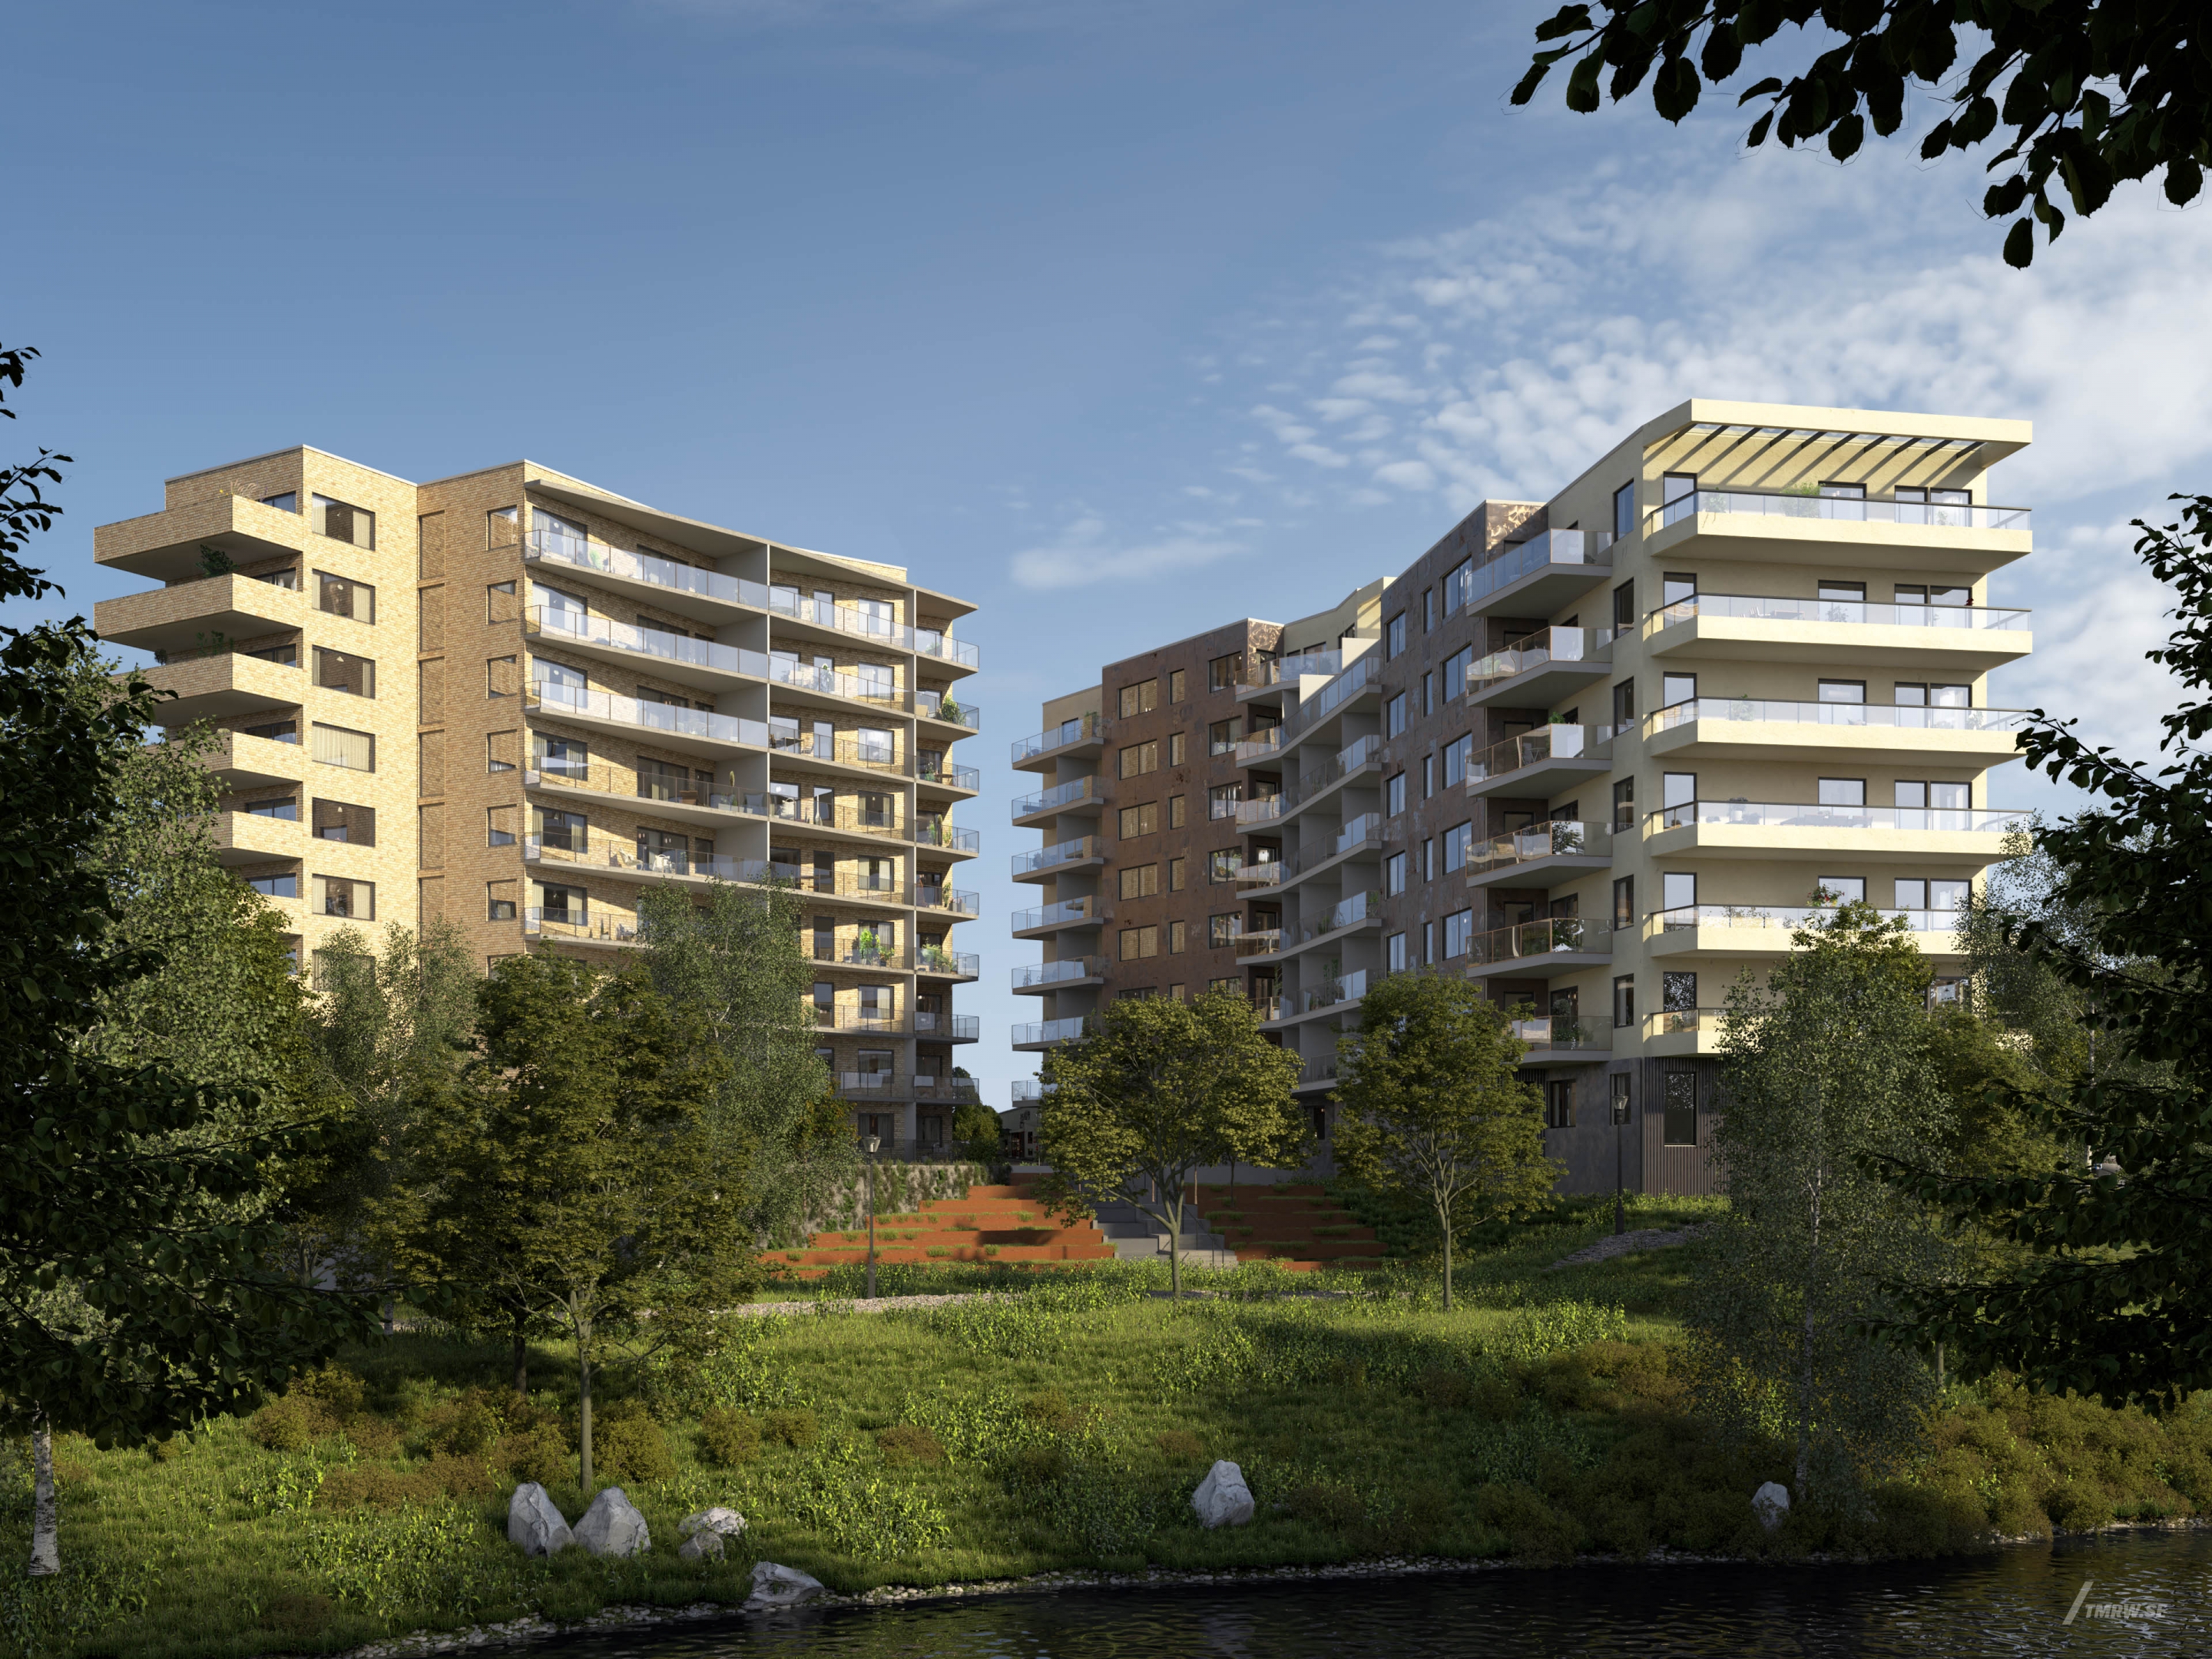 Architectural visualization of Svea Park for QPG in day light from an park view with green grass.